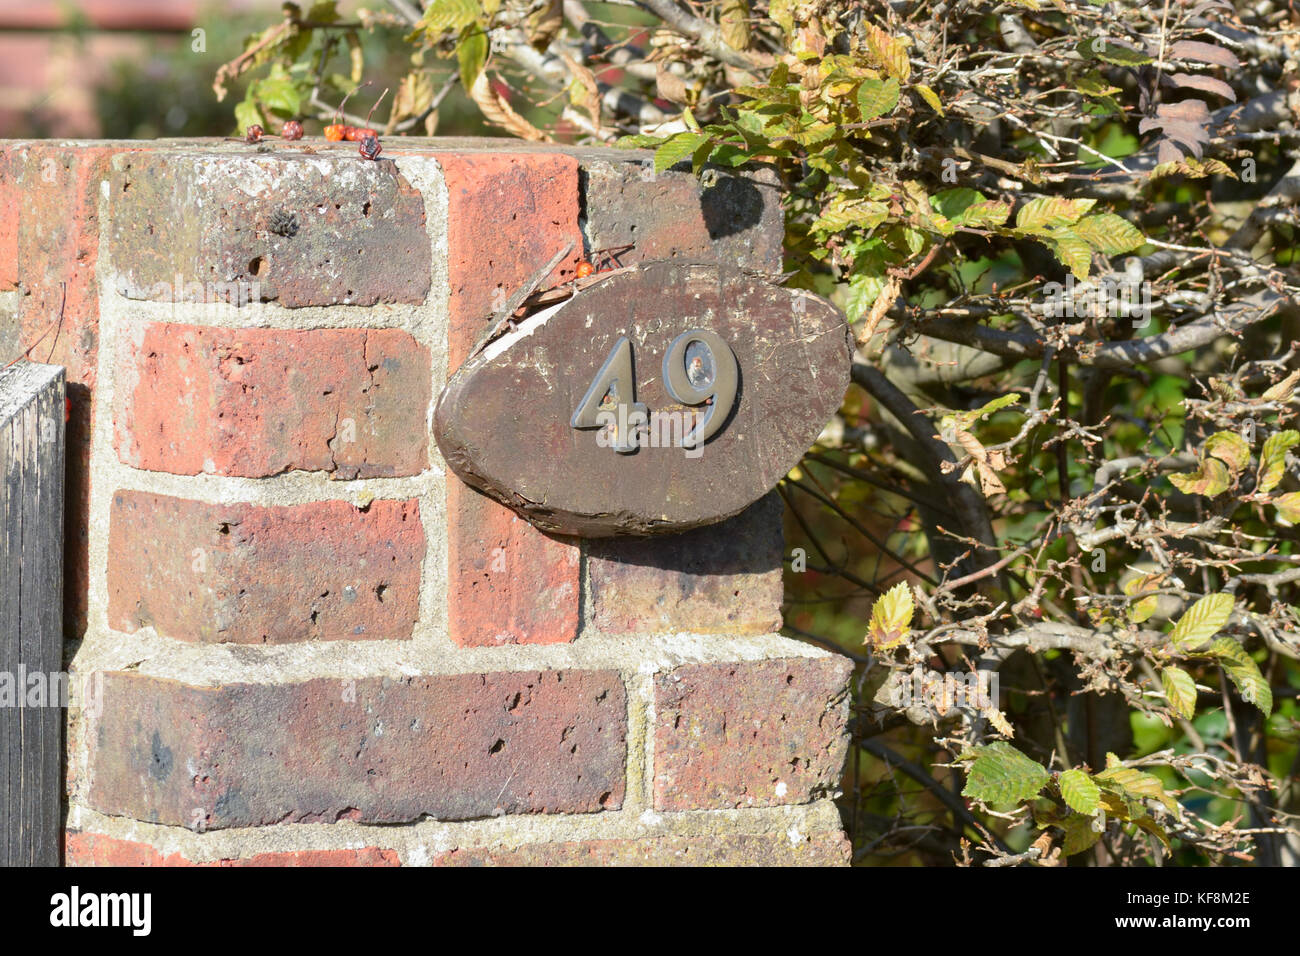 House number 49 sign on wall Stock Photo